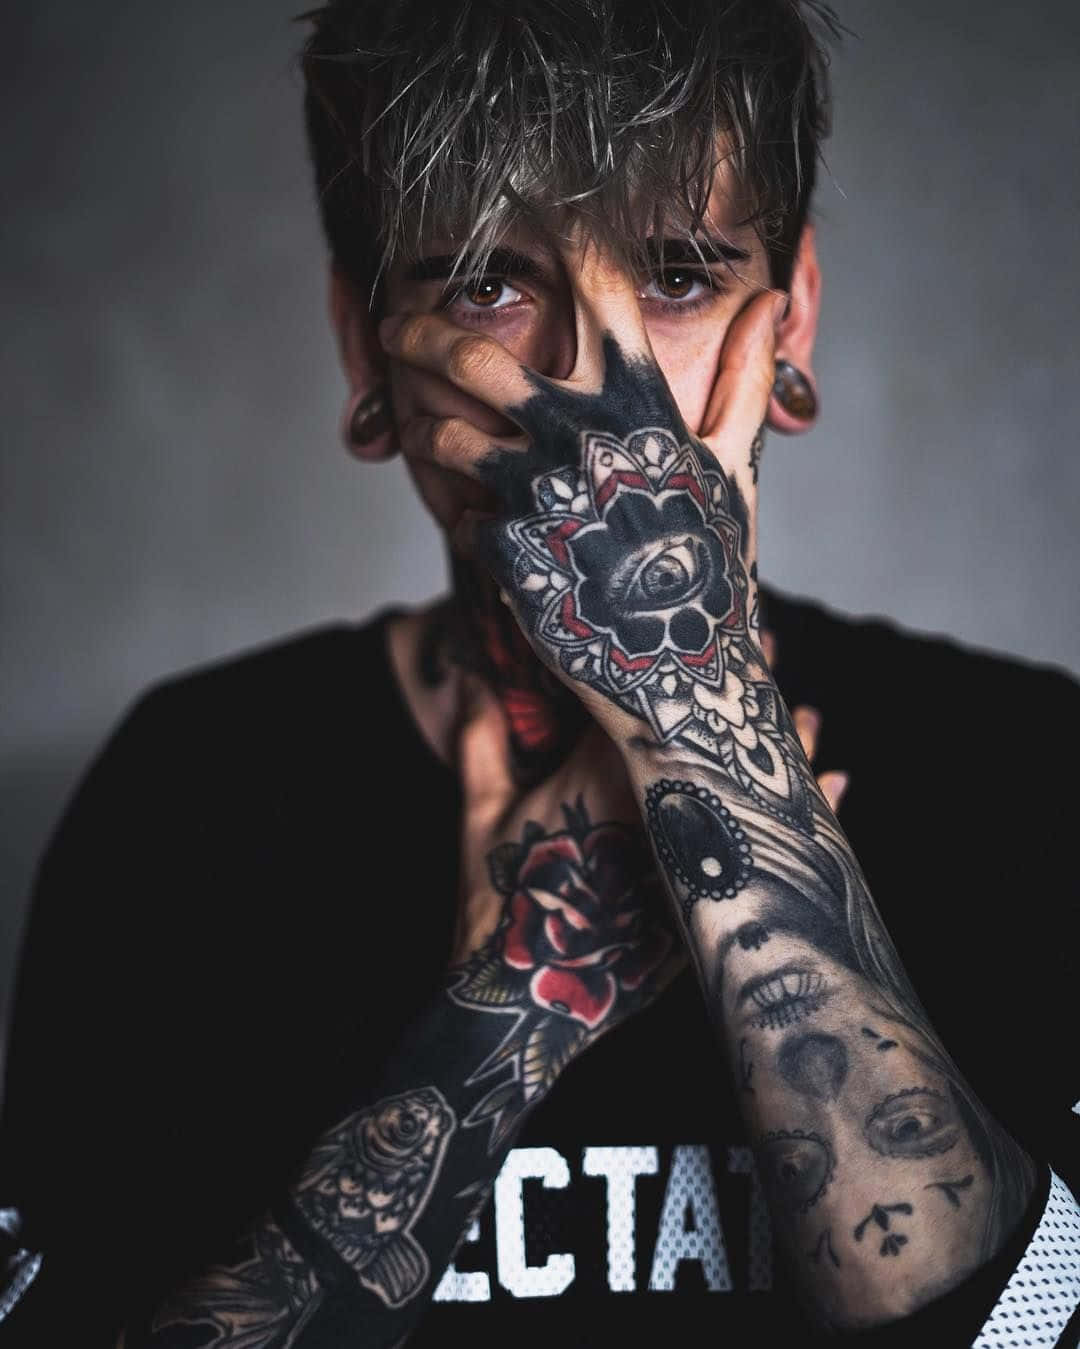 Download A Man With Tattoos Covering His Hands | Wallpapers.com